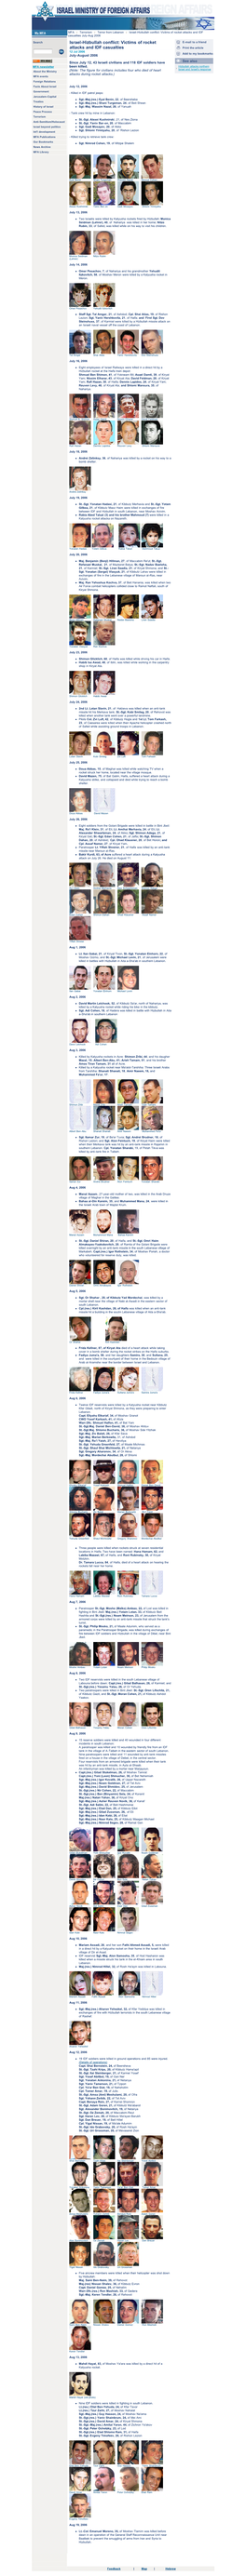 Israel-Hizbullah Conflict: Victims of Rocket Attacks and IDF Casualties July-Aug 2006